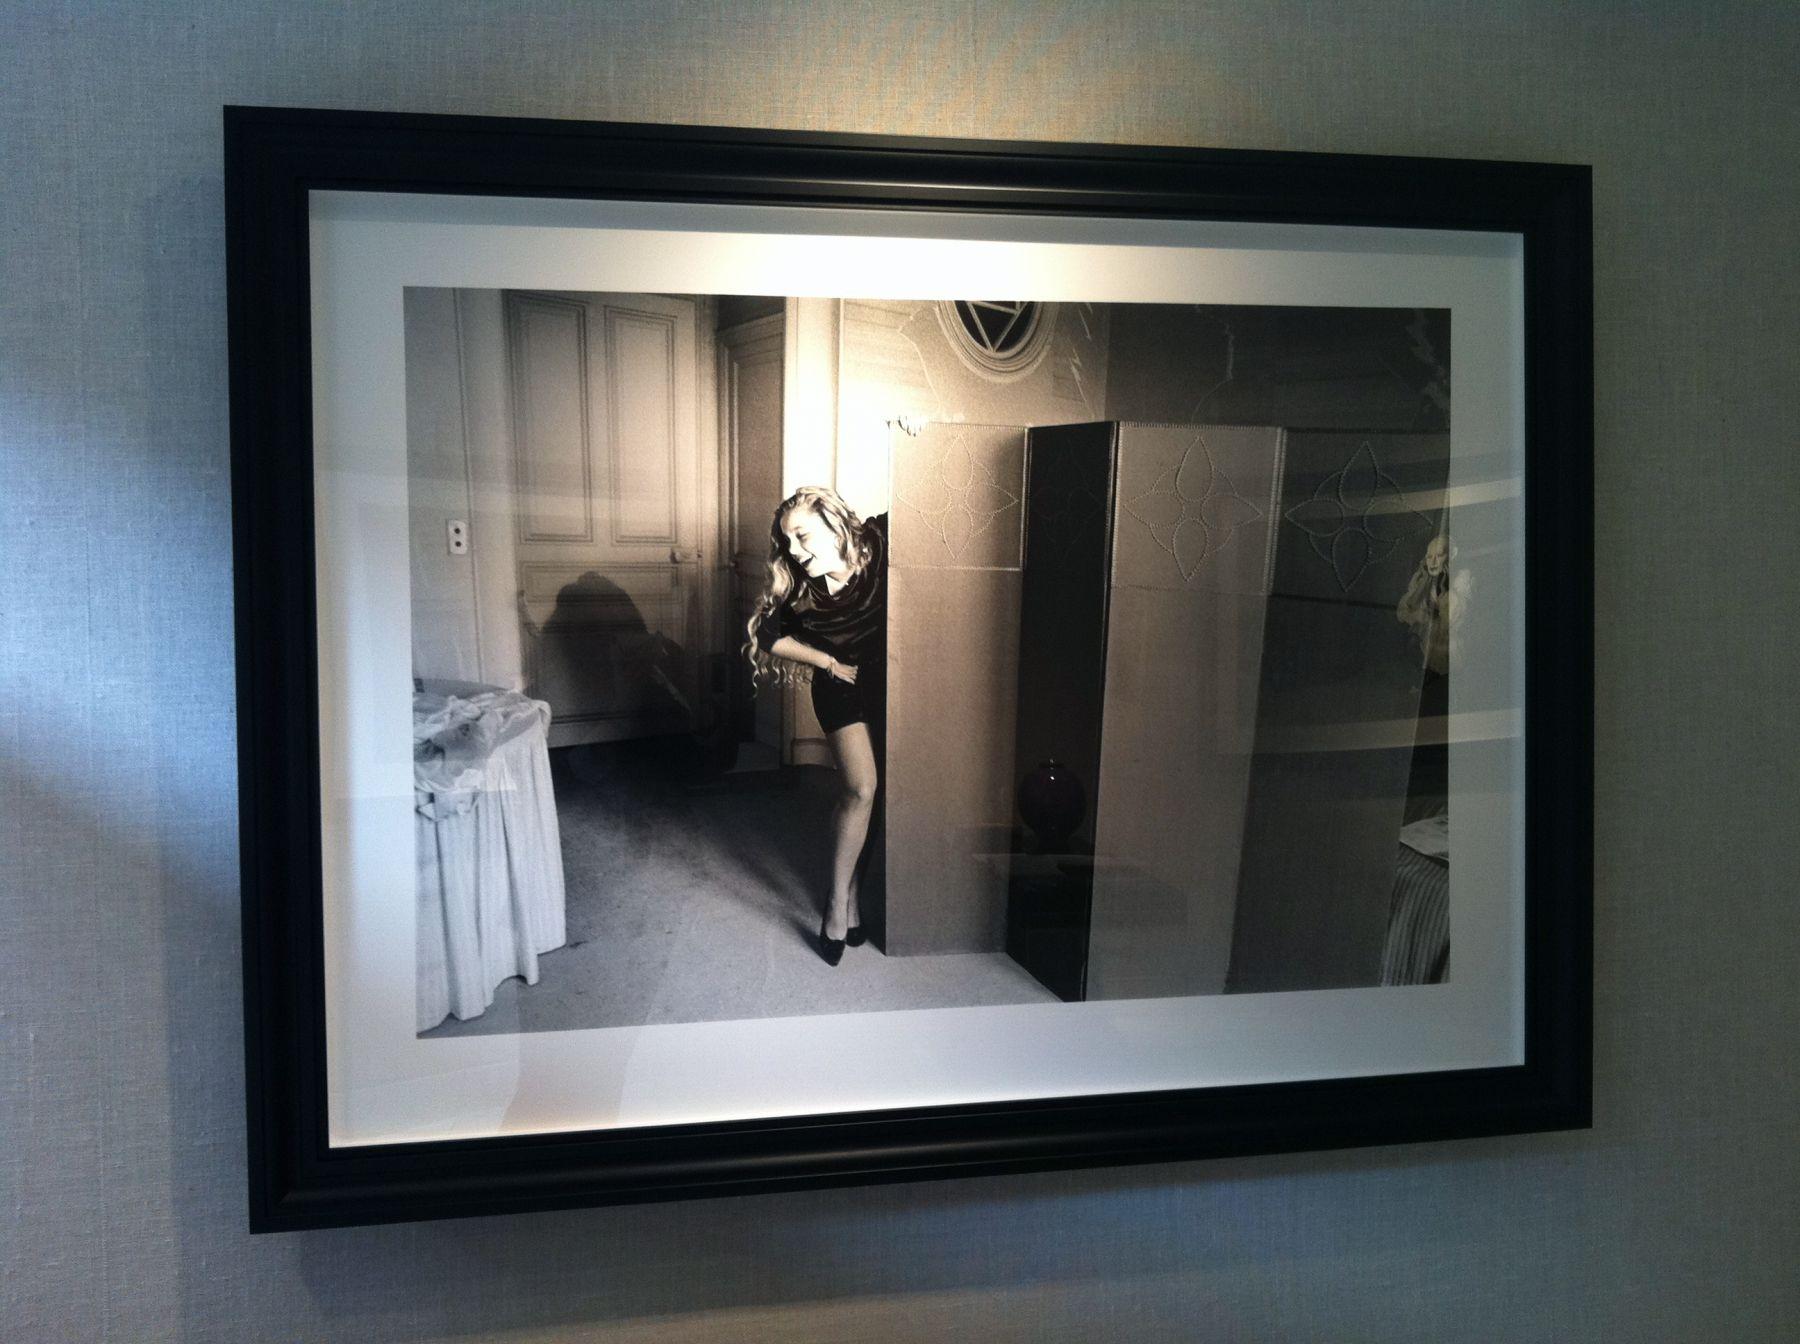 This large photograph is UNIQUE. Only one was made in that large size. The photograph is a silver gelatin print mounted on disband and framed in a back wooden frame. The image in the living room shows the scale and size of the work (different image